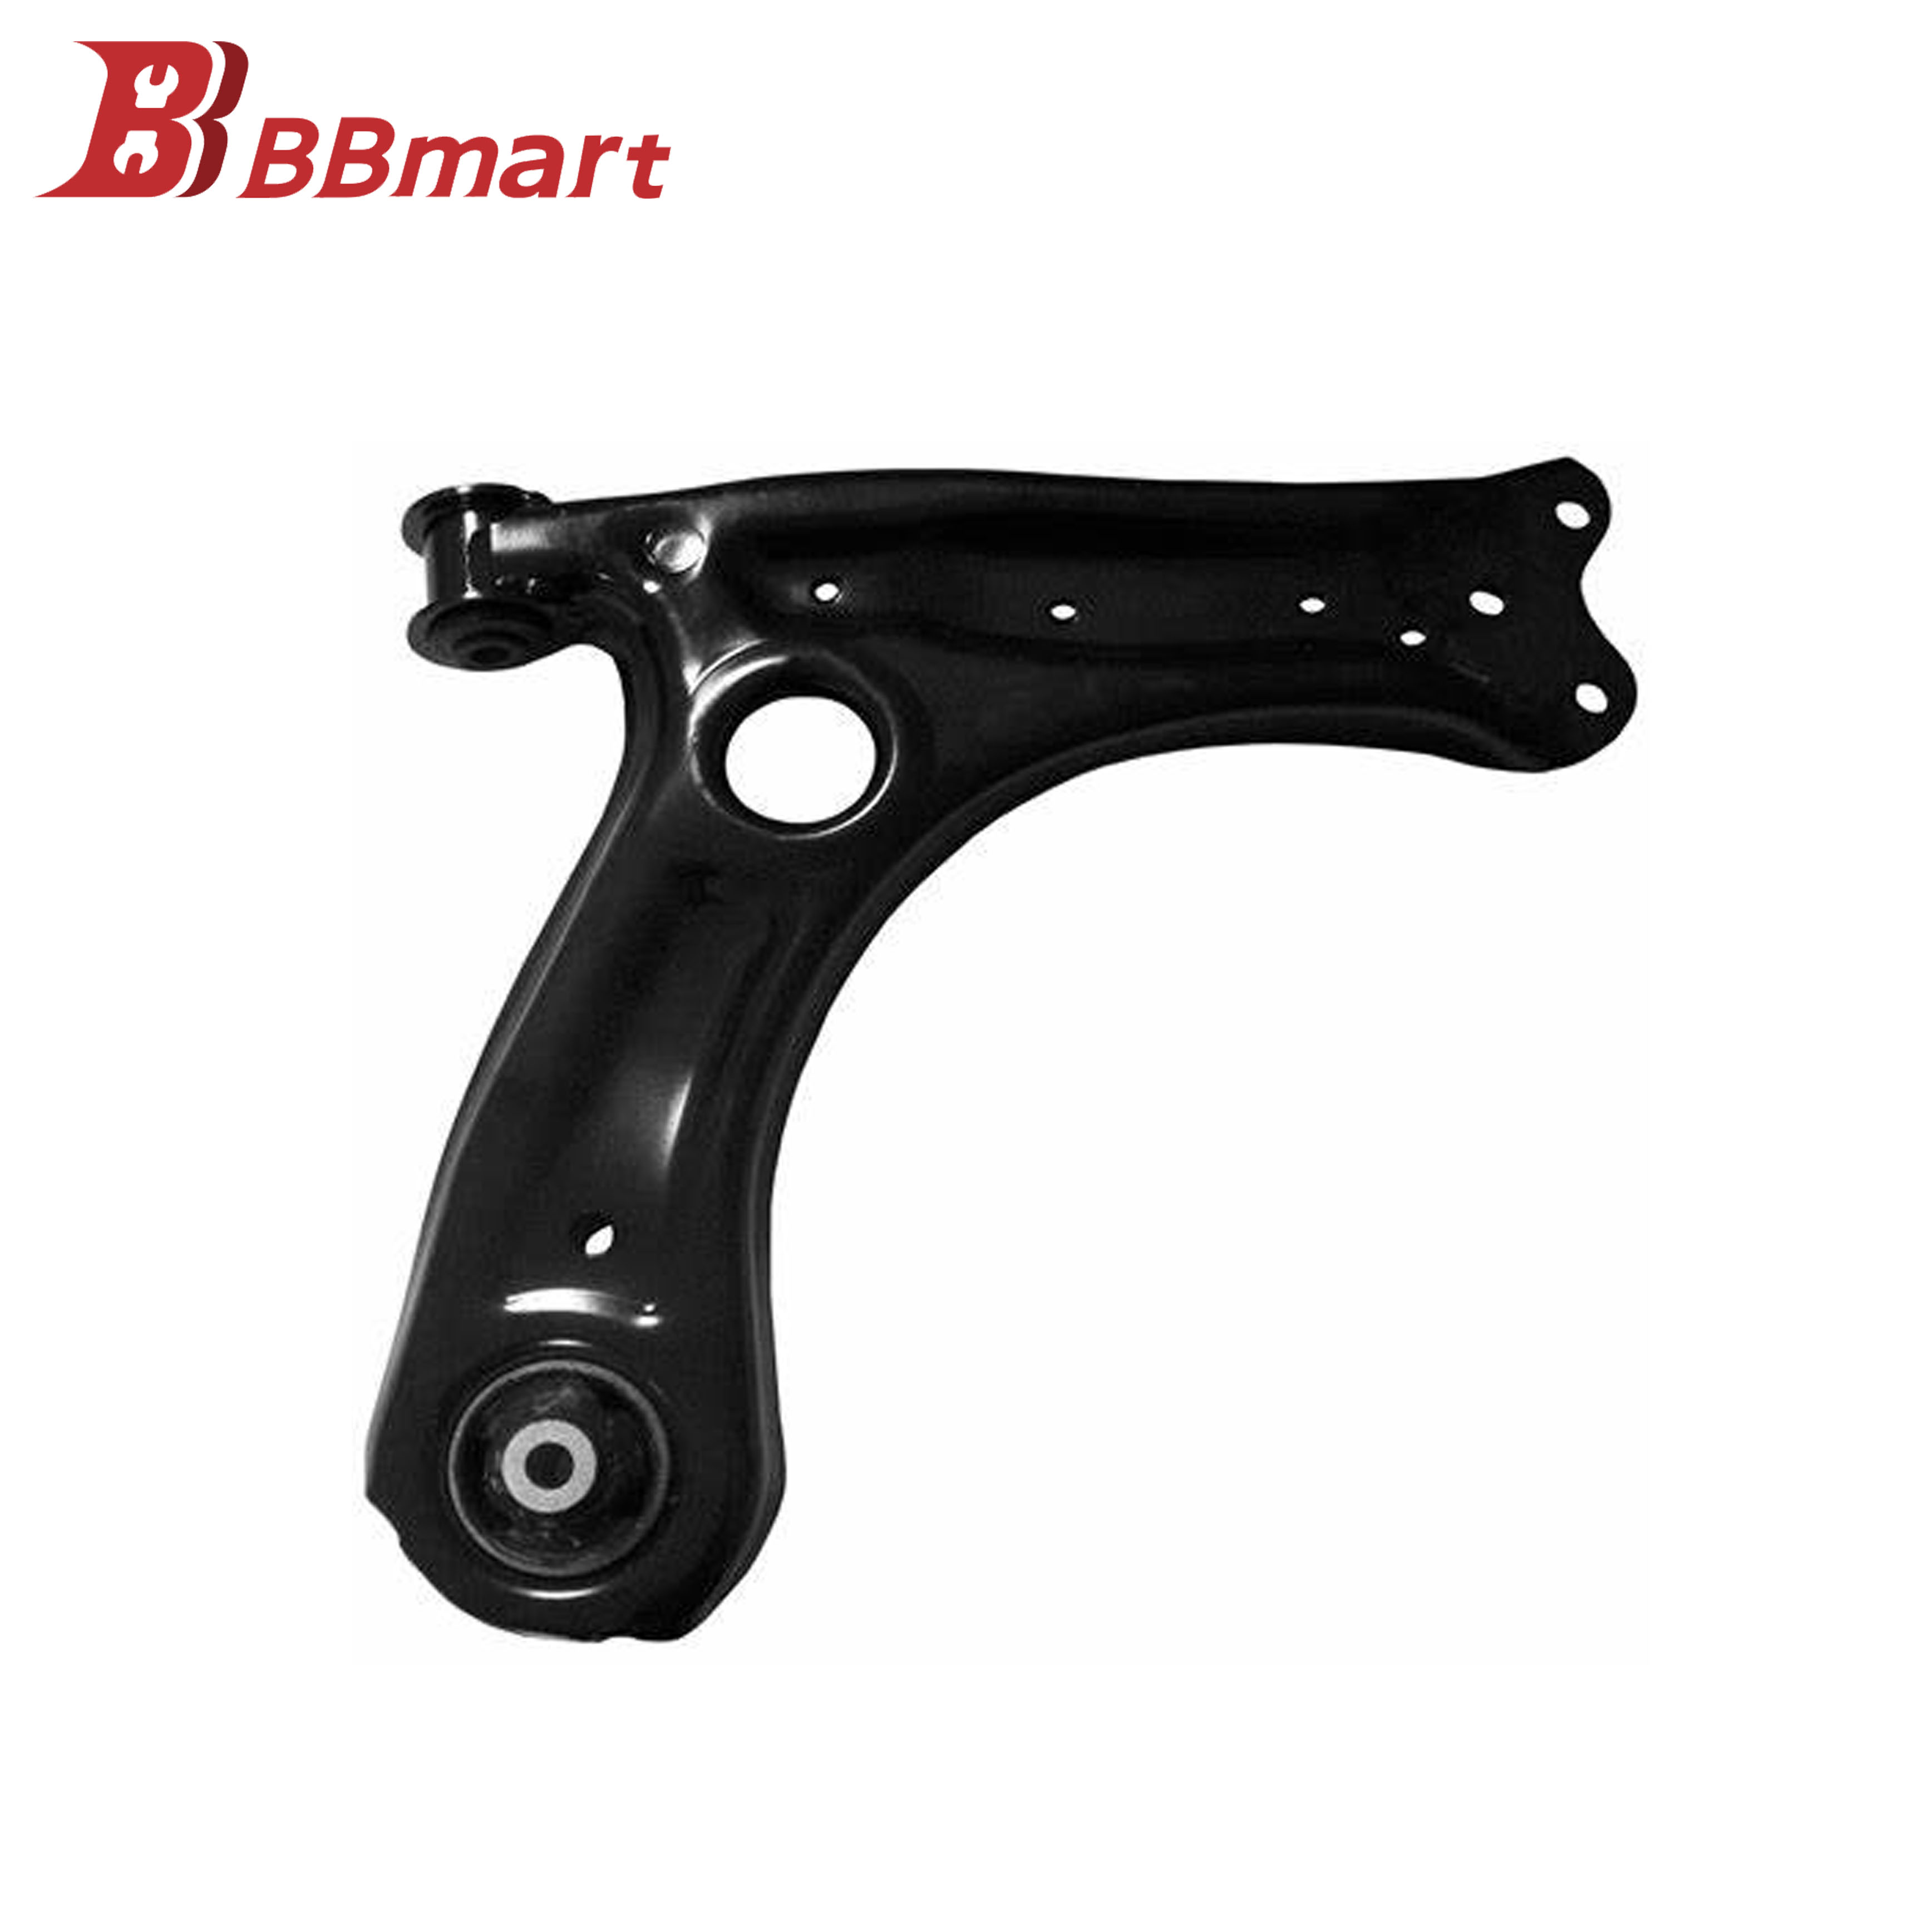 BBmart OEM Auto Parts Front Lower Control Arm 6R0407152 For VW POLO SKODA SEAT OE 6R0407152